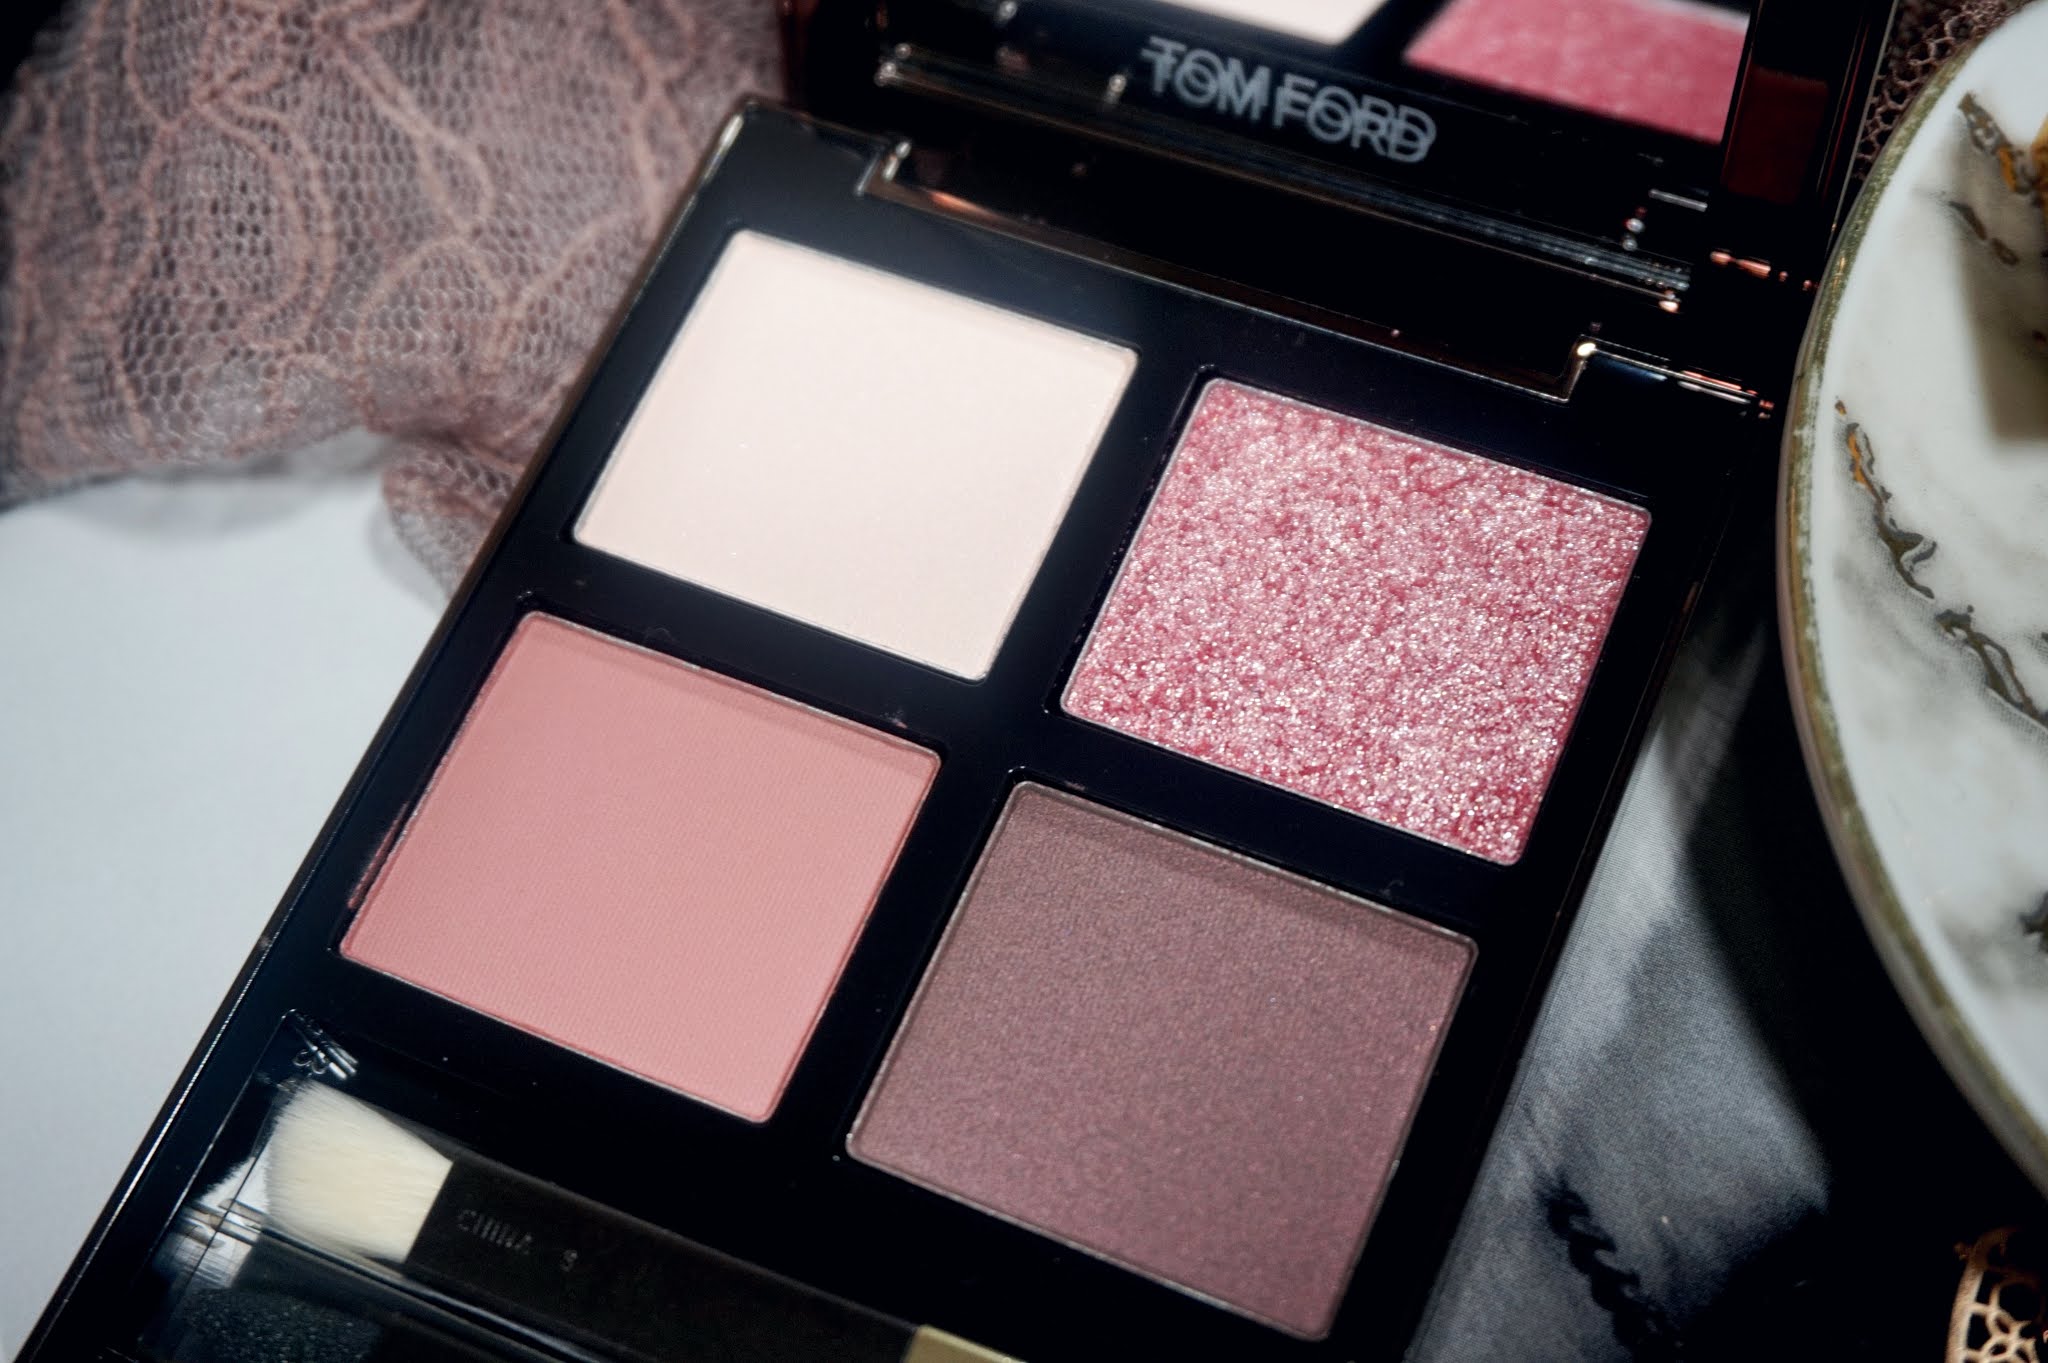 Tom Ford Insolent Rose Eye Color Quad Review and Swatches